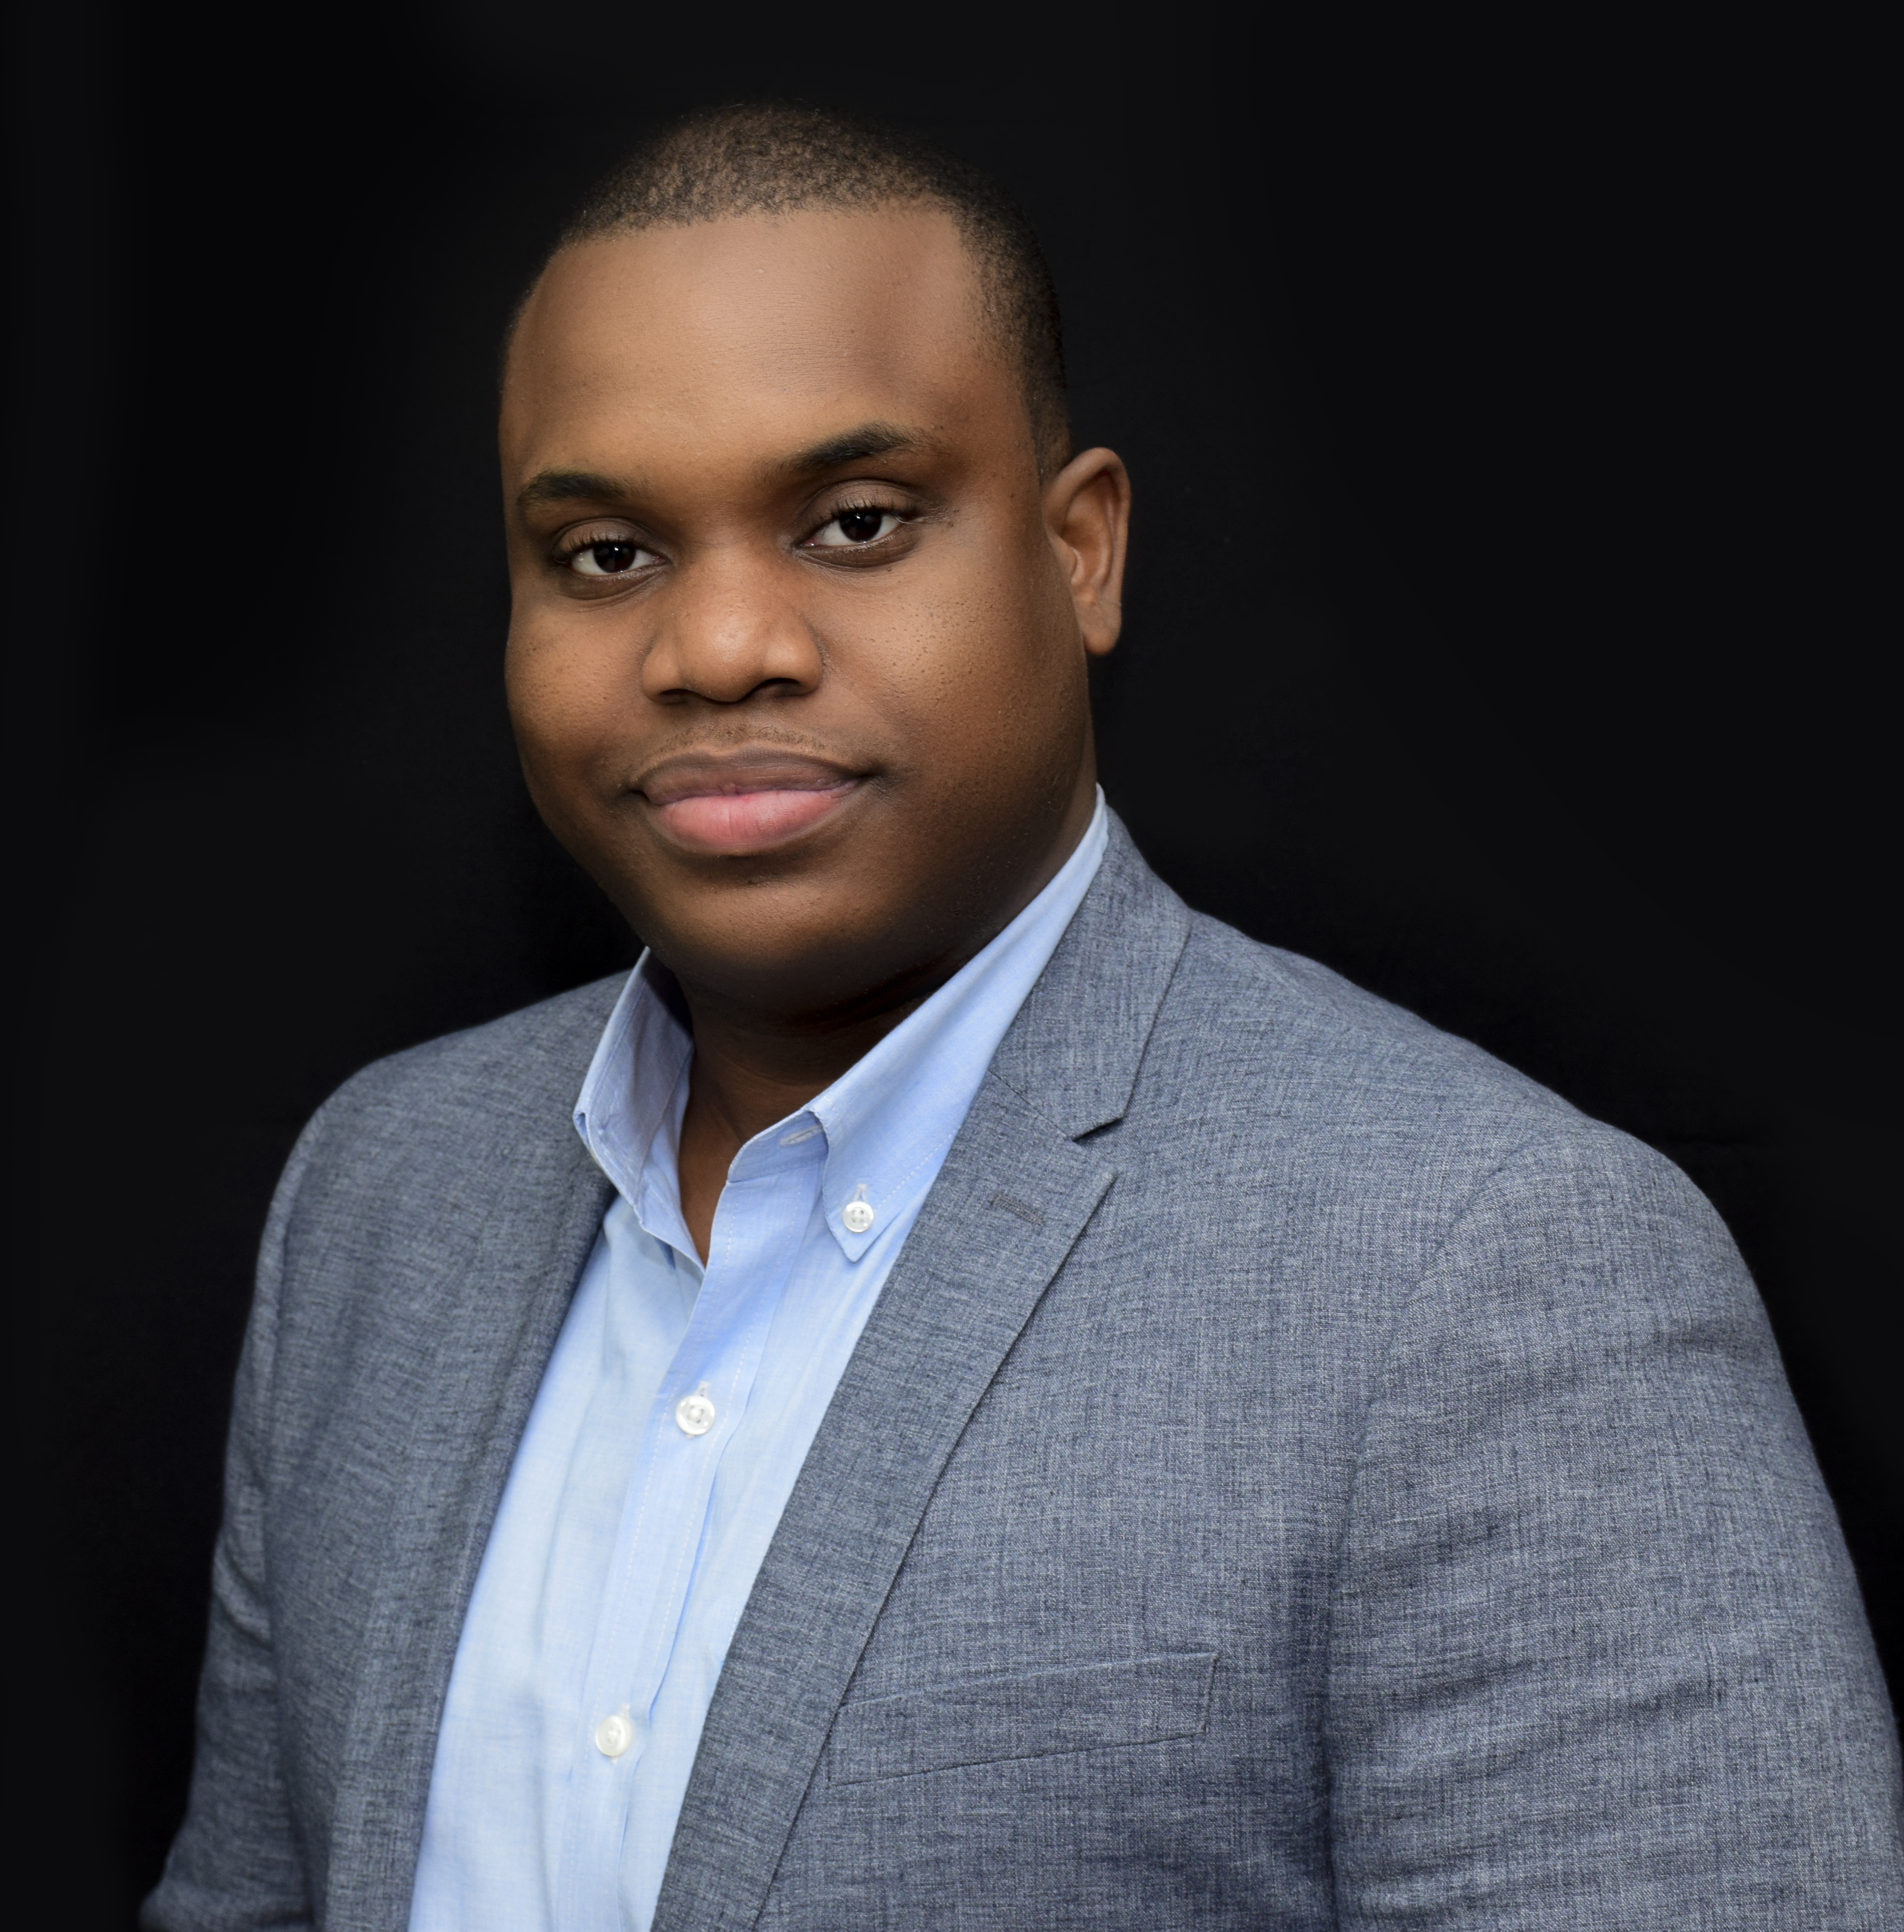 Meet Clifford Dessables From Focused Media - Offering Digital Marketing Services To Small Businesses